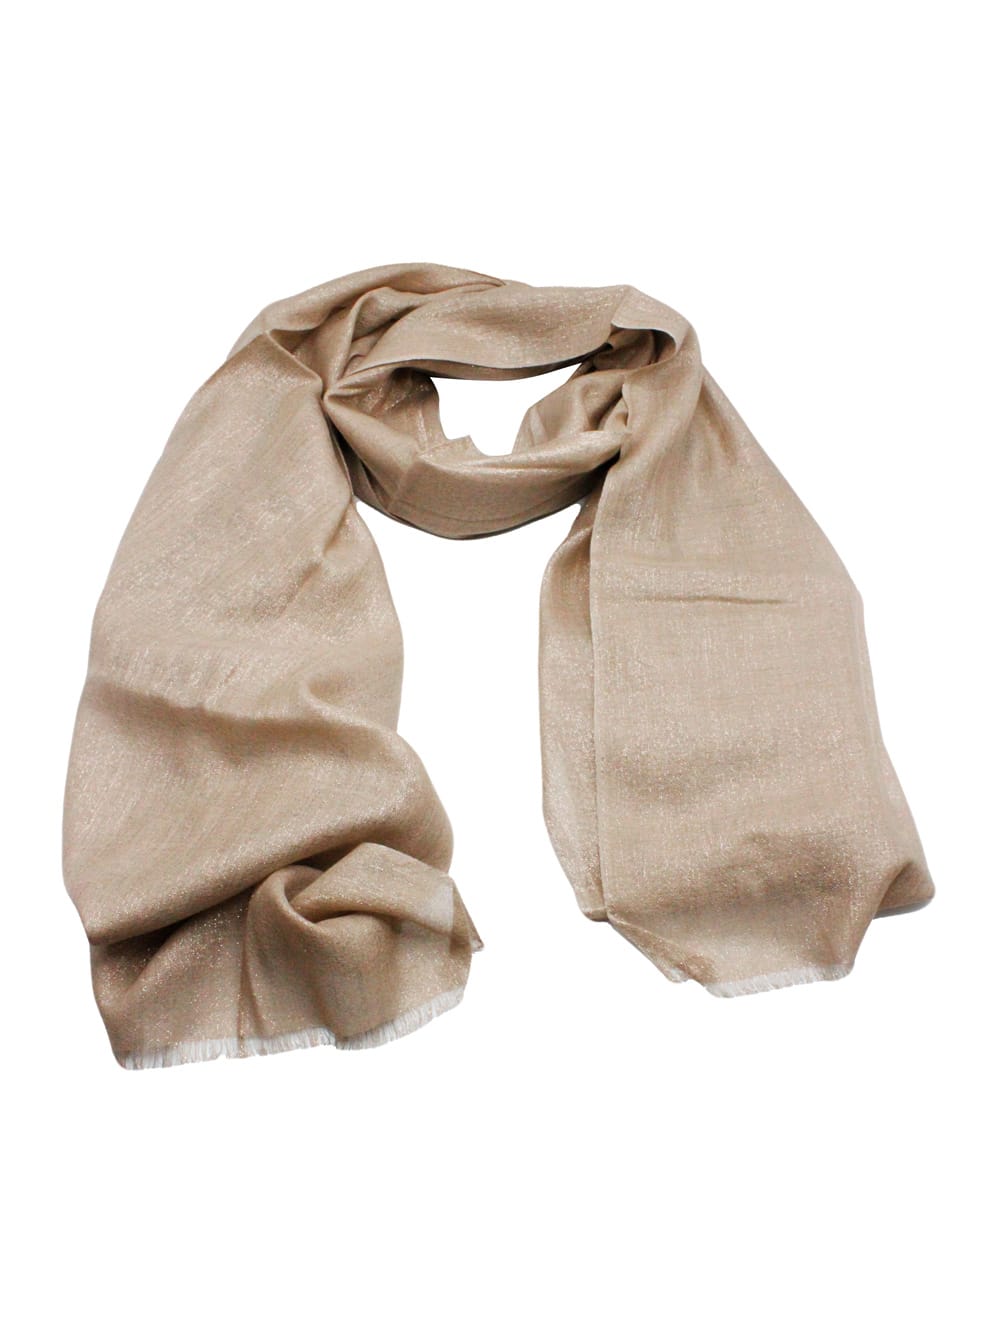 BRUNELLO CUCINELLI LIGHTWEIGHT CASHMERE AND SILK SCARF WITH LUREX LAMÈ THREAD AND FRINGED HEM. MEASURES 80 X 225 CM